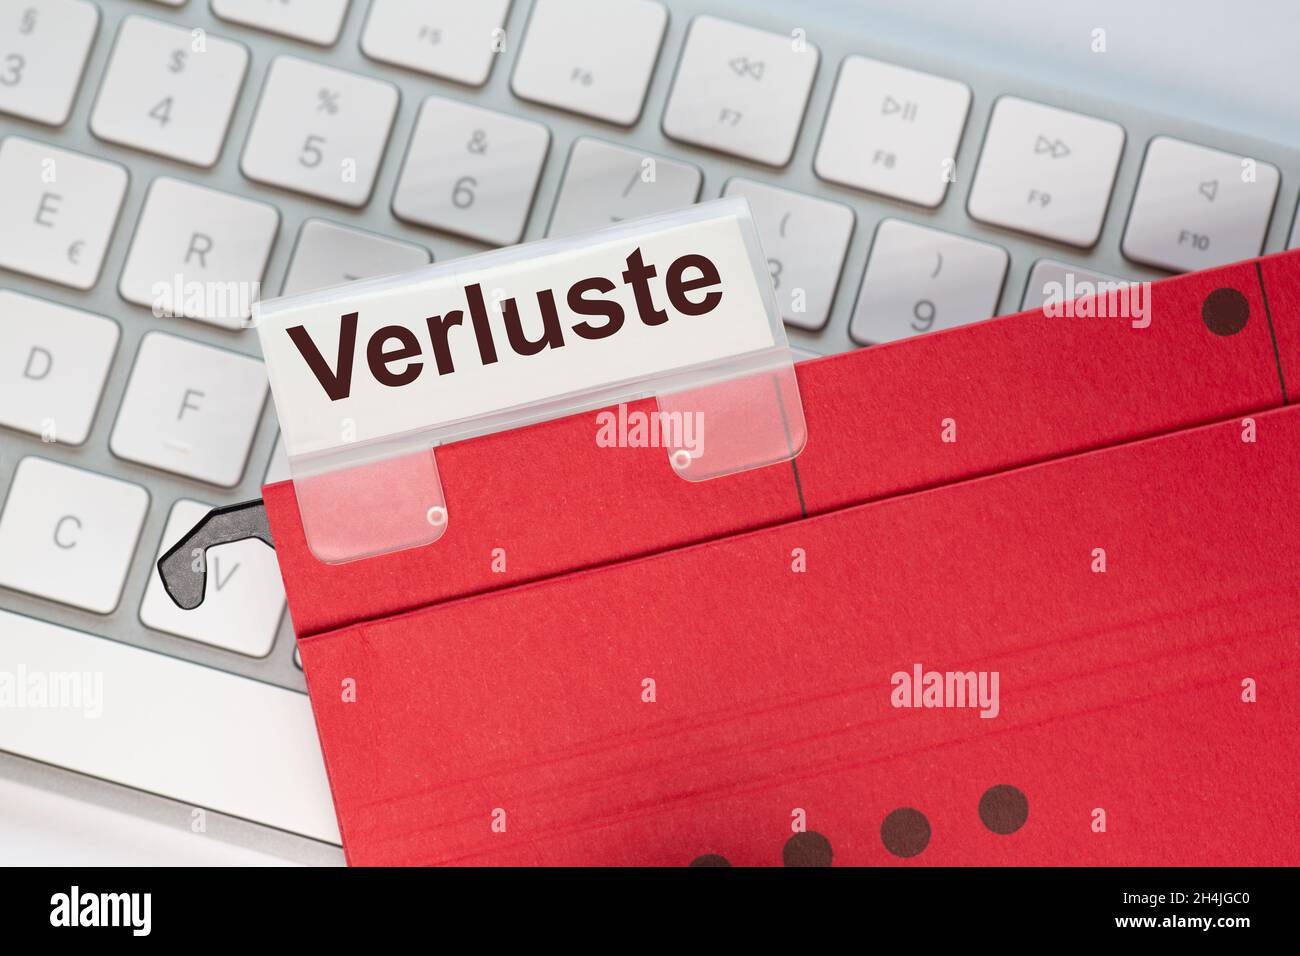 The German word for losses can be seen on the label of a red hanging folder. The hanging folder is on a computer keyboard. Stock Photo